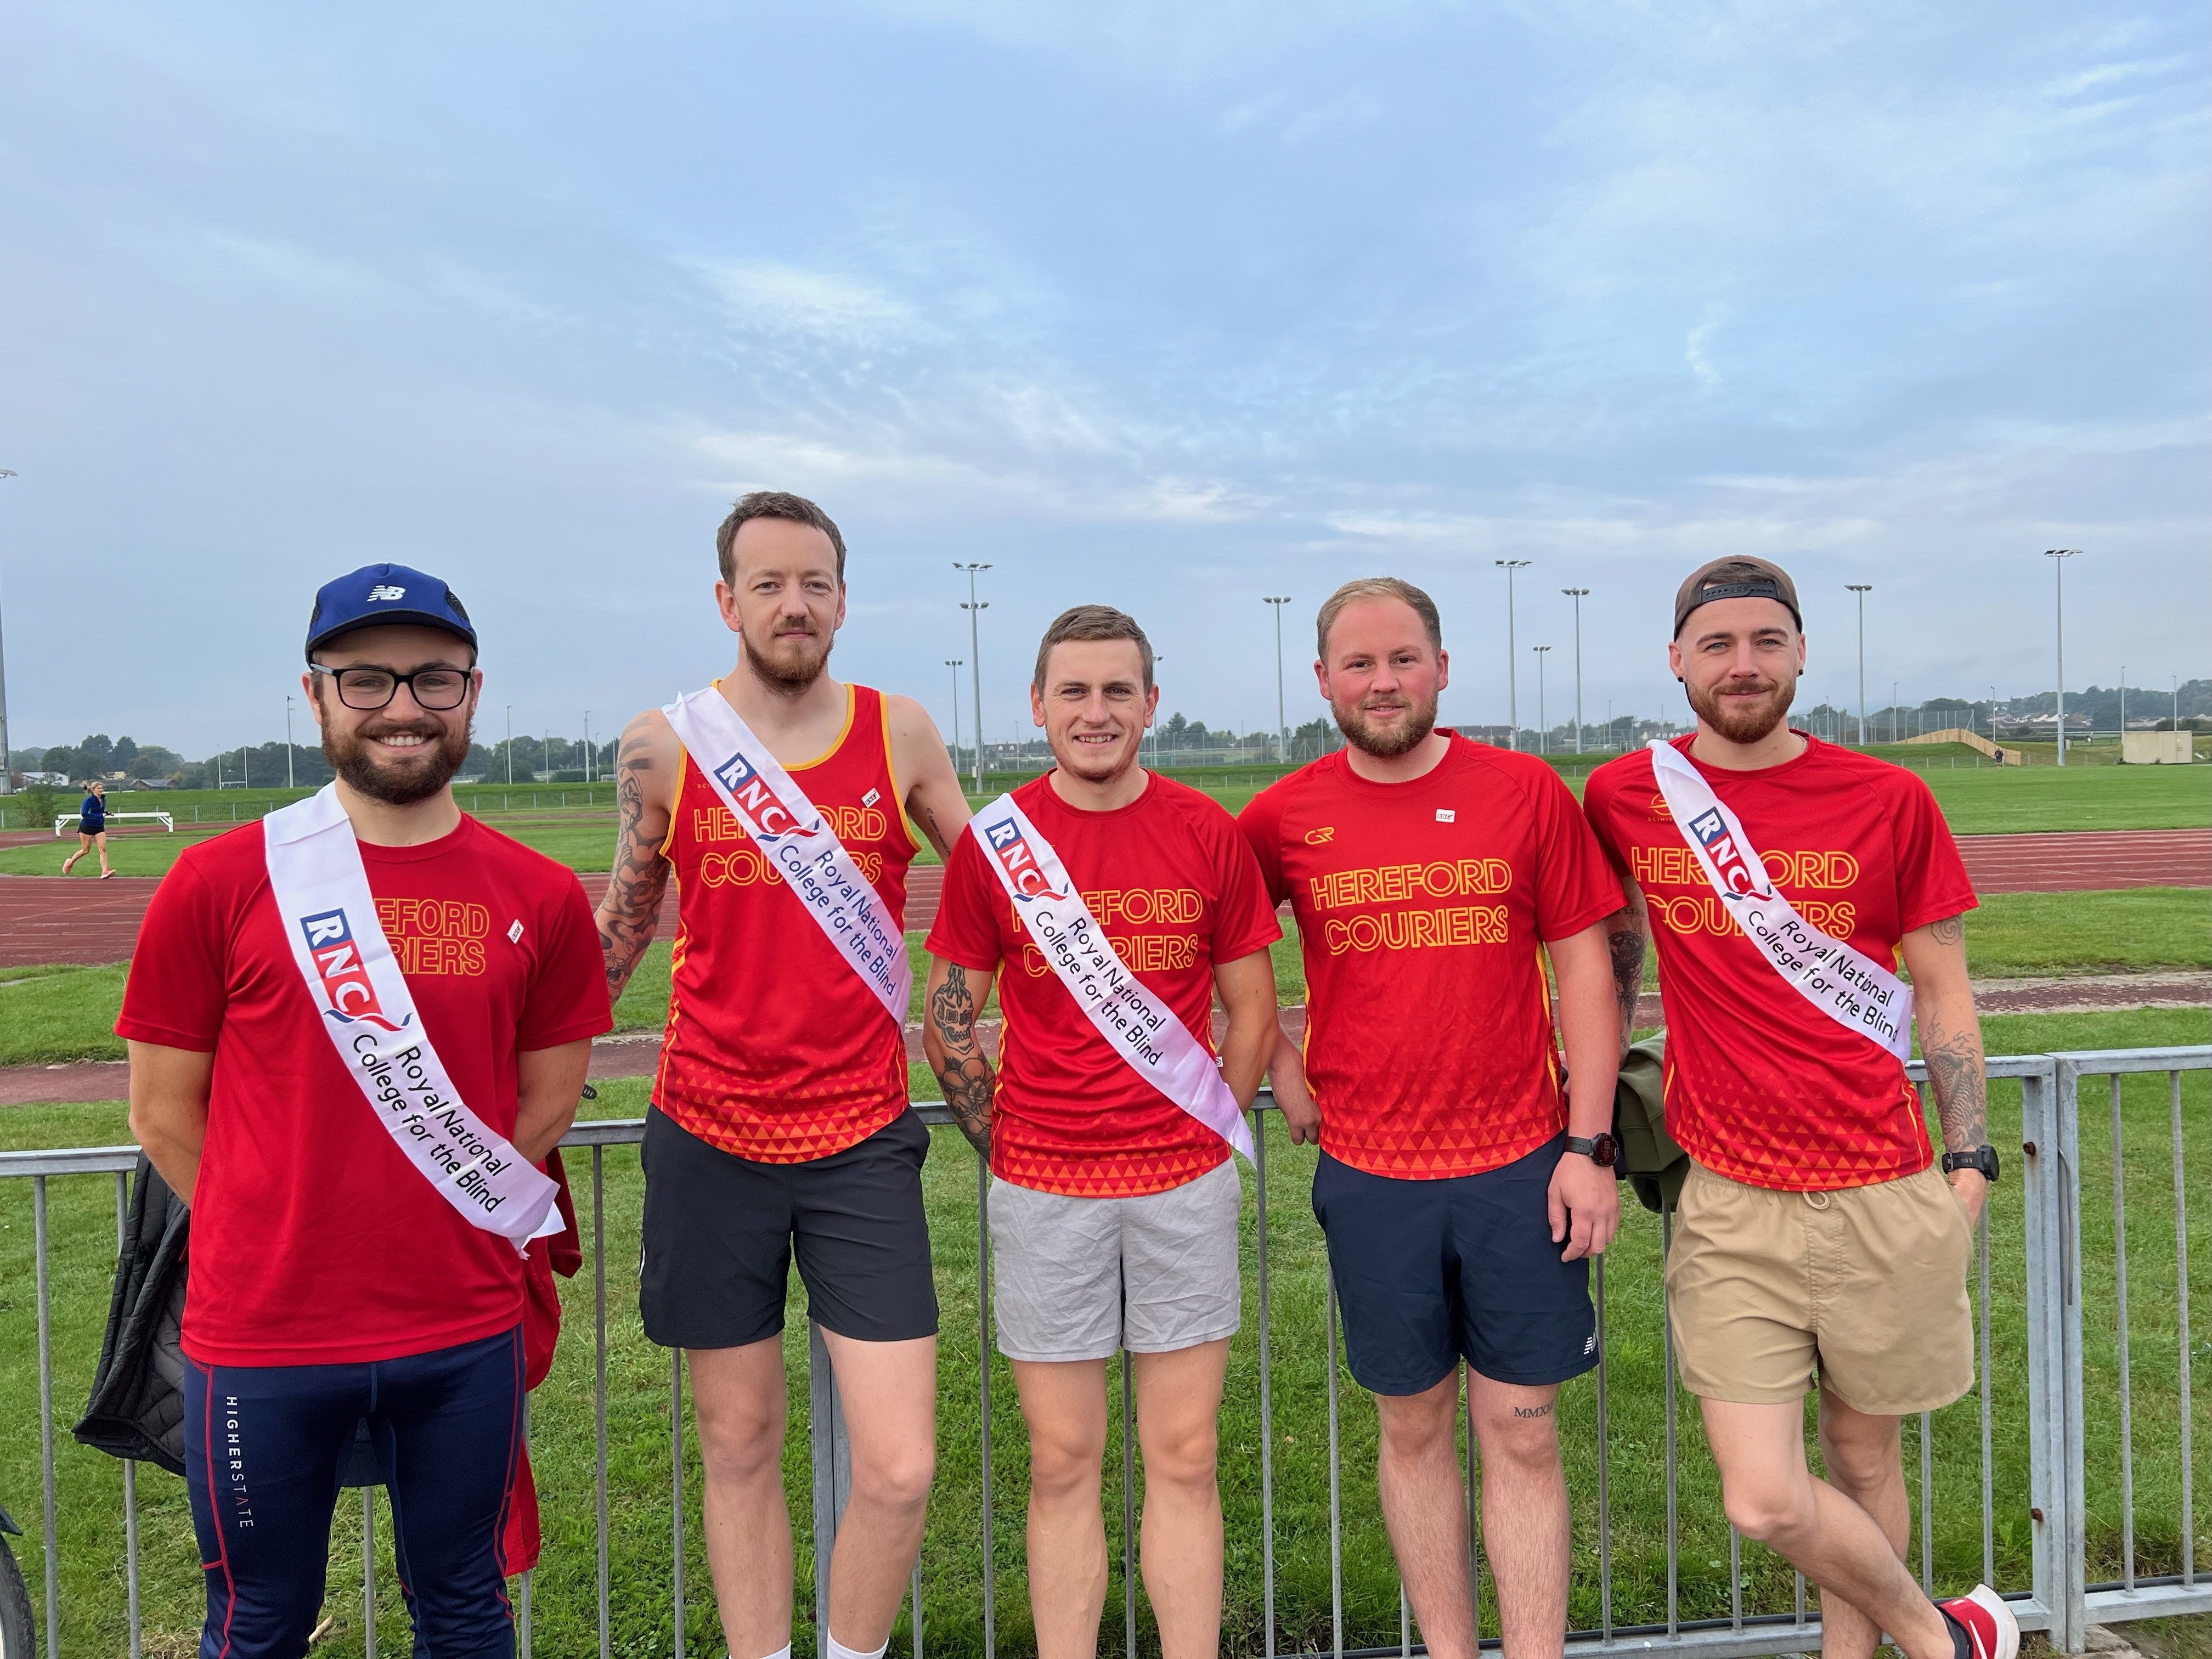 Five of the Hereford Couriers stand together in red courier t-shirts and wearing RNC sashes